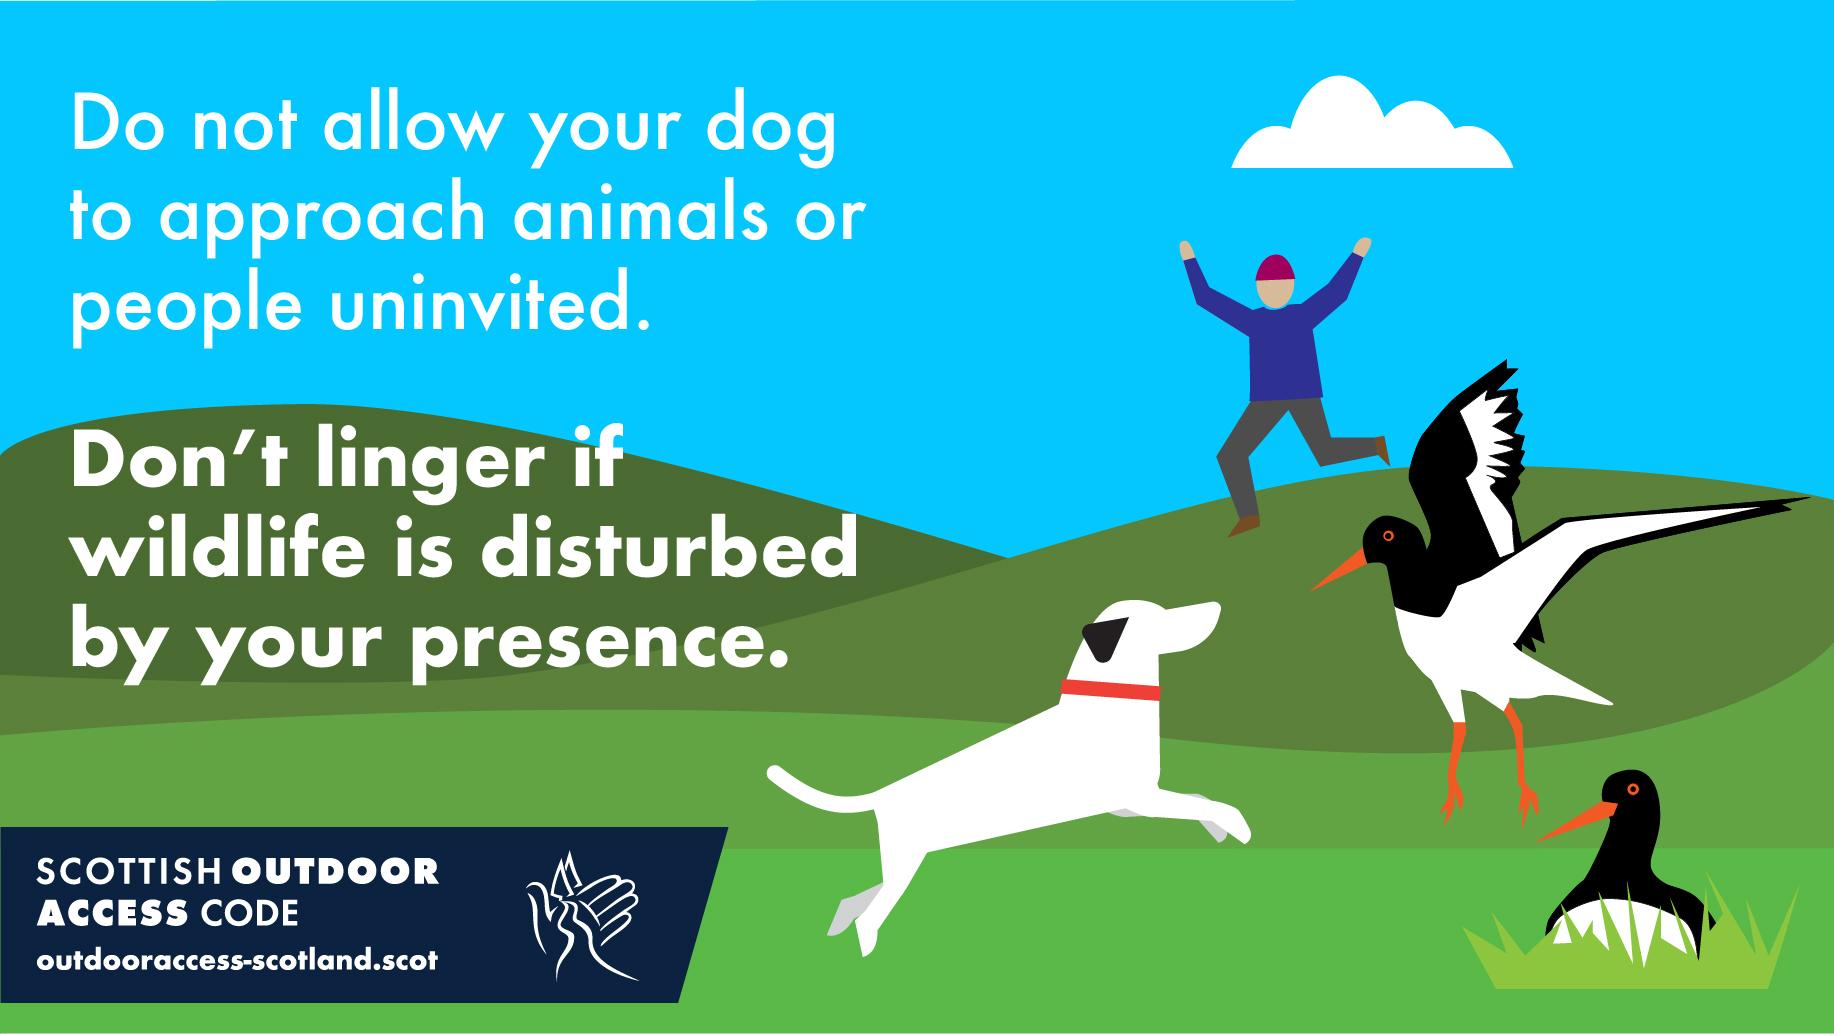 Don't allow your dog to approach animals or people uninvited. Don't linger if wildlife is disturbed by your presence.